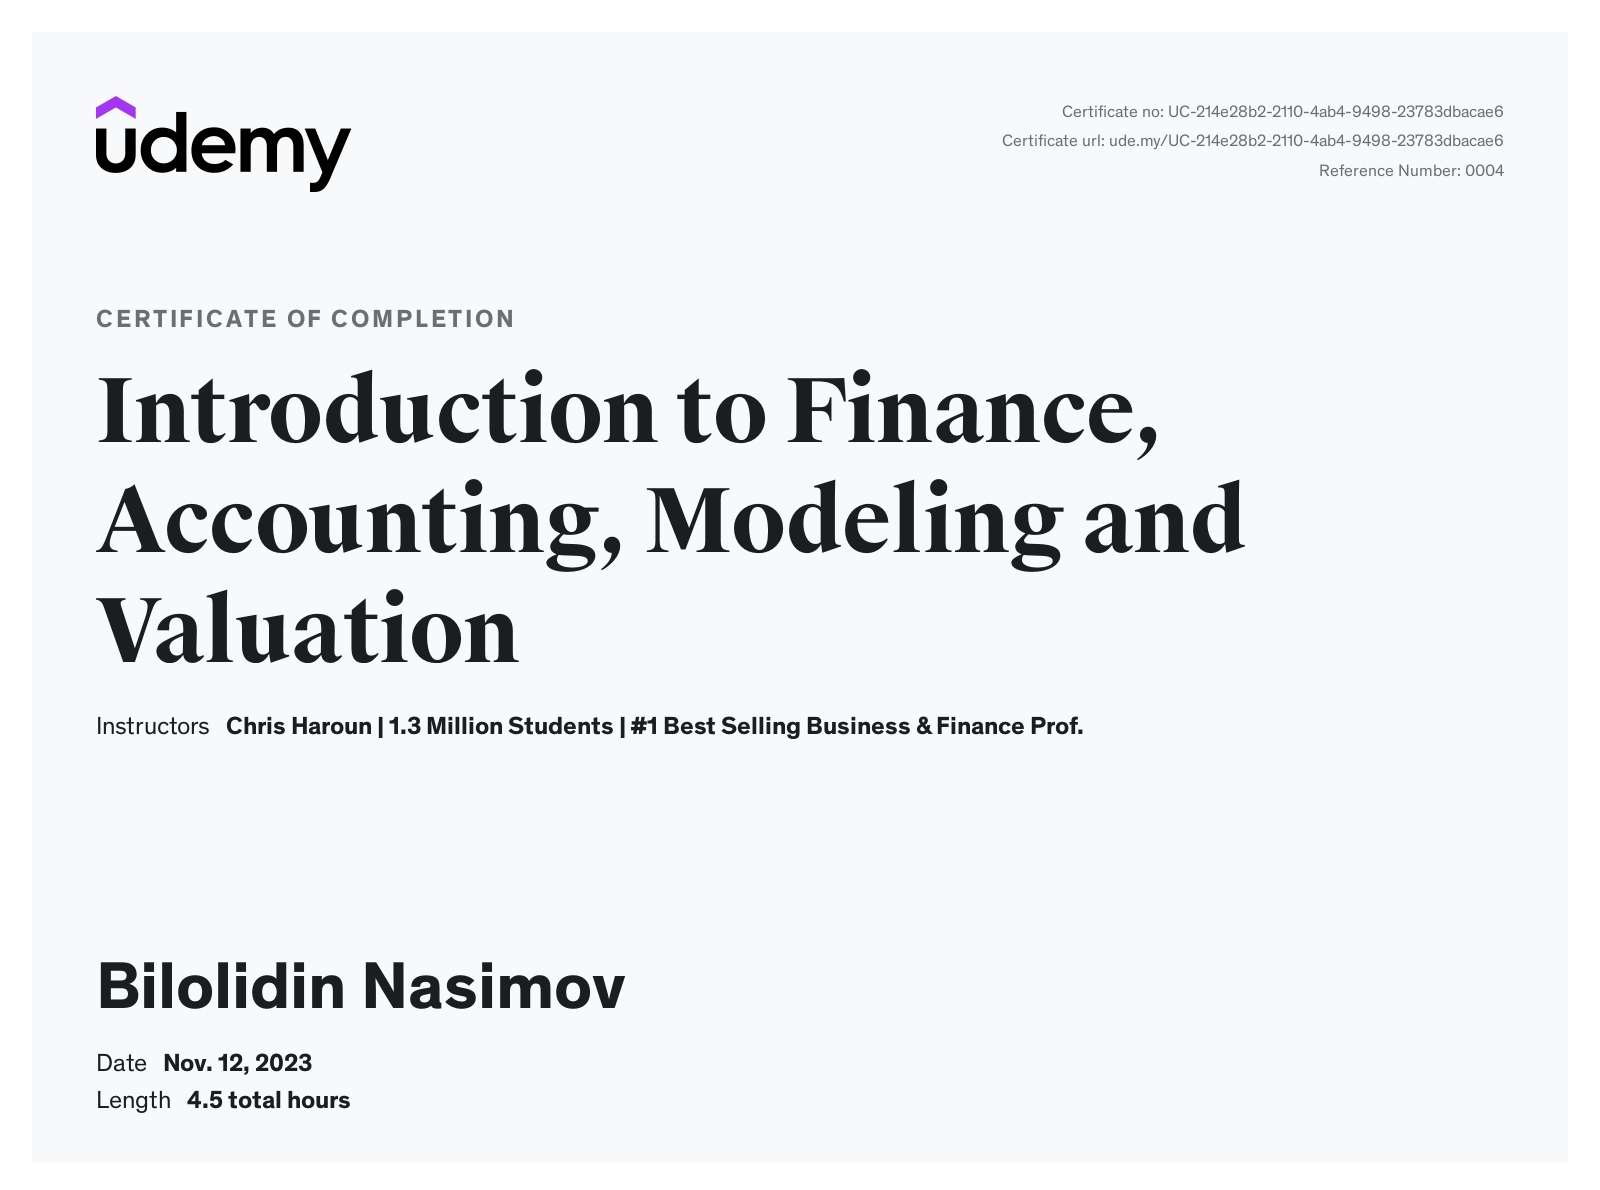 Introduction to Finance, Accounting, Modeling and Valuation